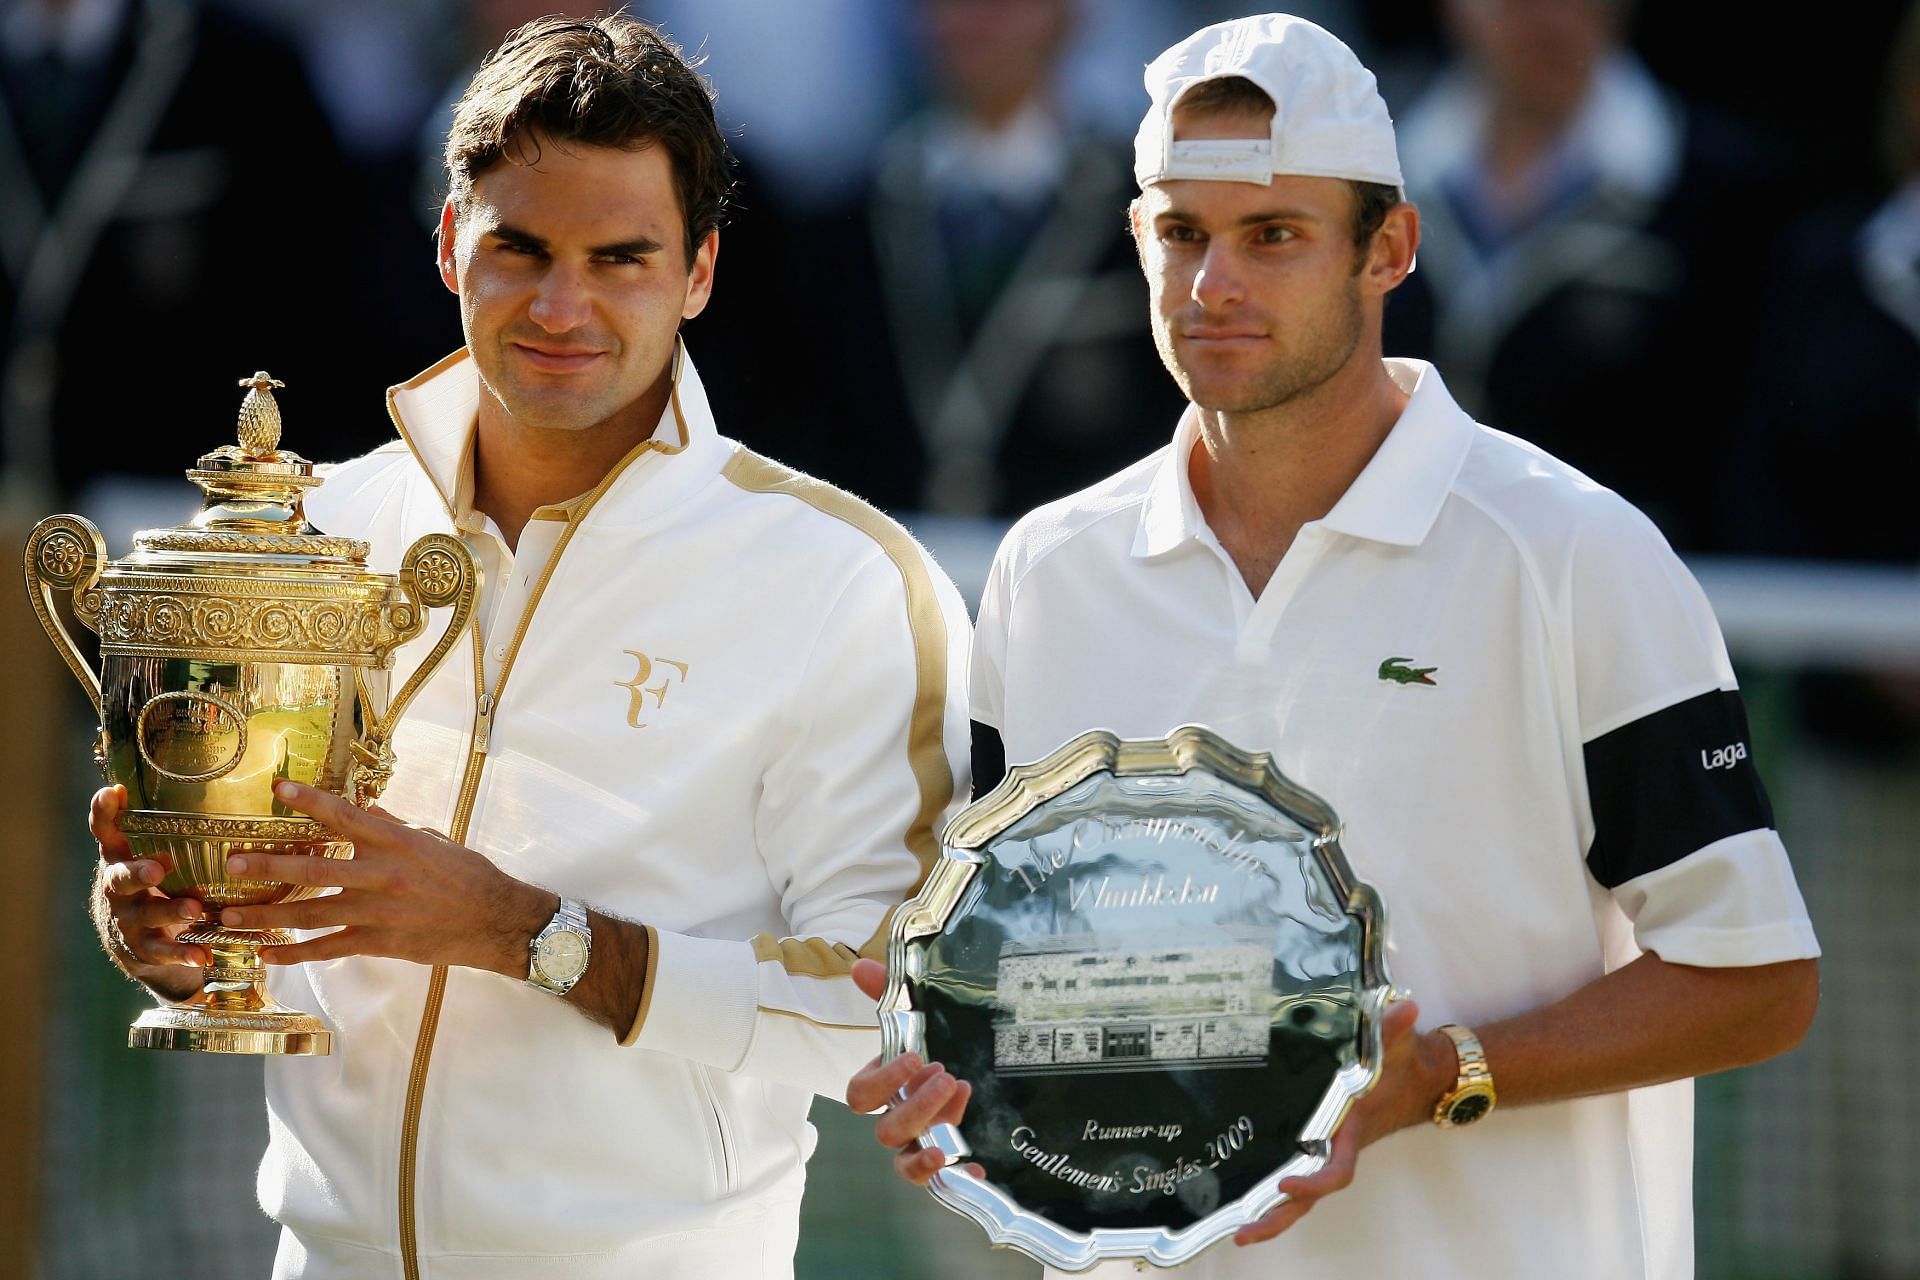 Andy Roddick (right) and Roger Federer at the Wimbledon finals in 2009